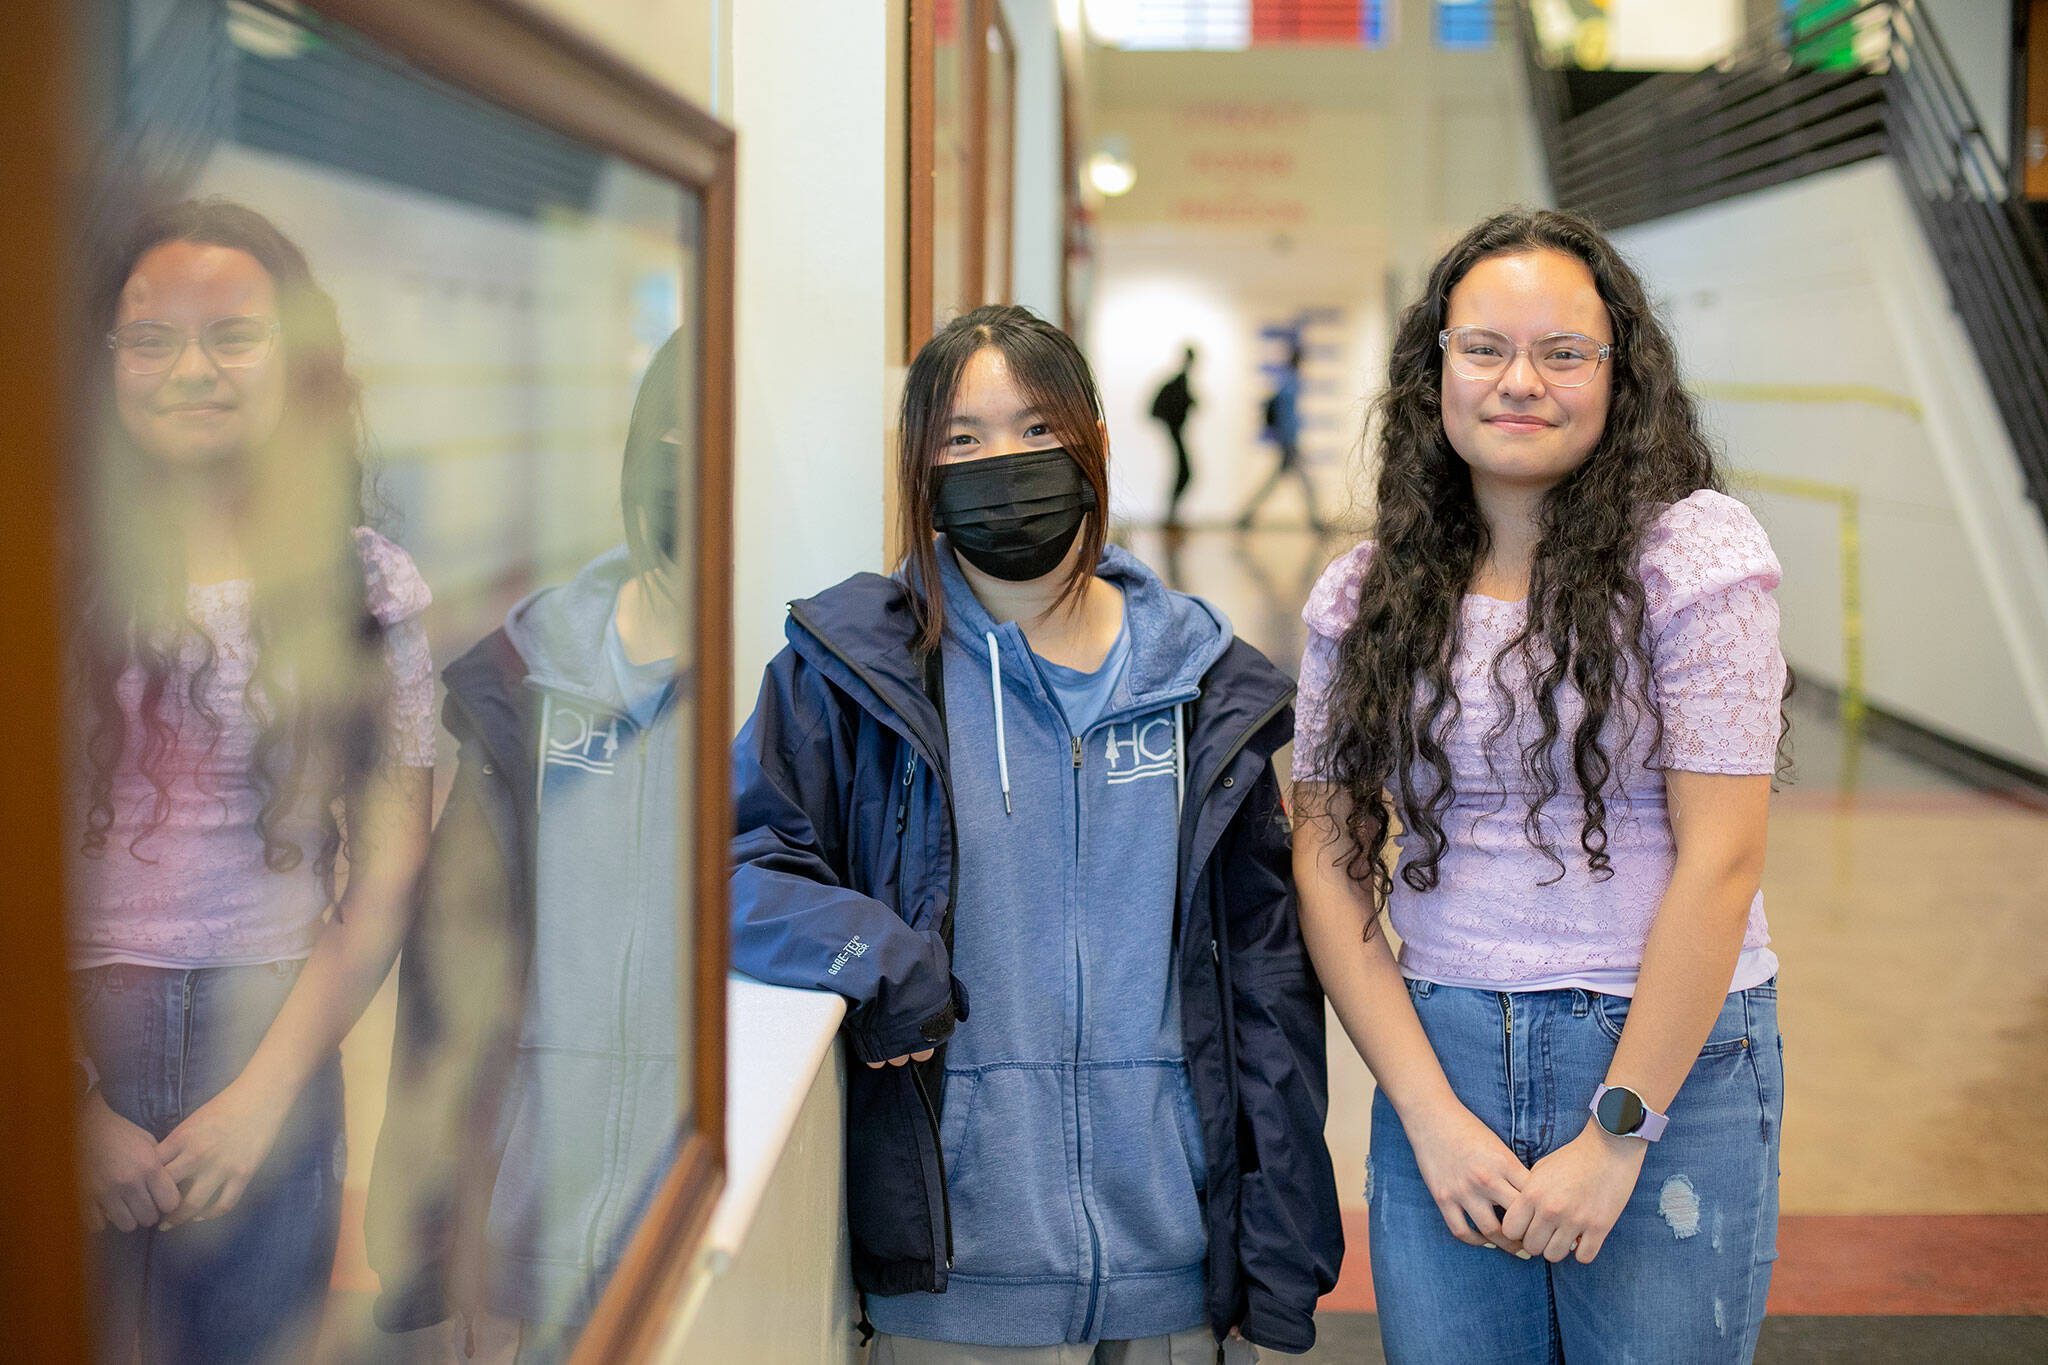 Sydney Vo and Azul Rangel, juniors at Mariner High School, stand in the entrance hallway at Mariner in Everett. The two have won the Congressional App Challenge in Washington’s Second District for the second year in a row, this time for the creation of HopeHorizon. (Ryan Berry / The Herald)